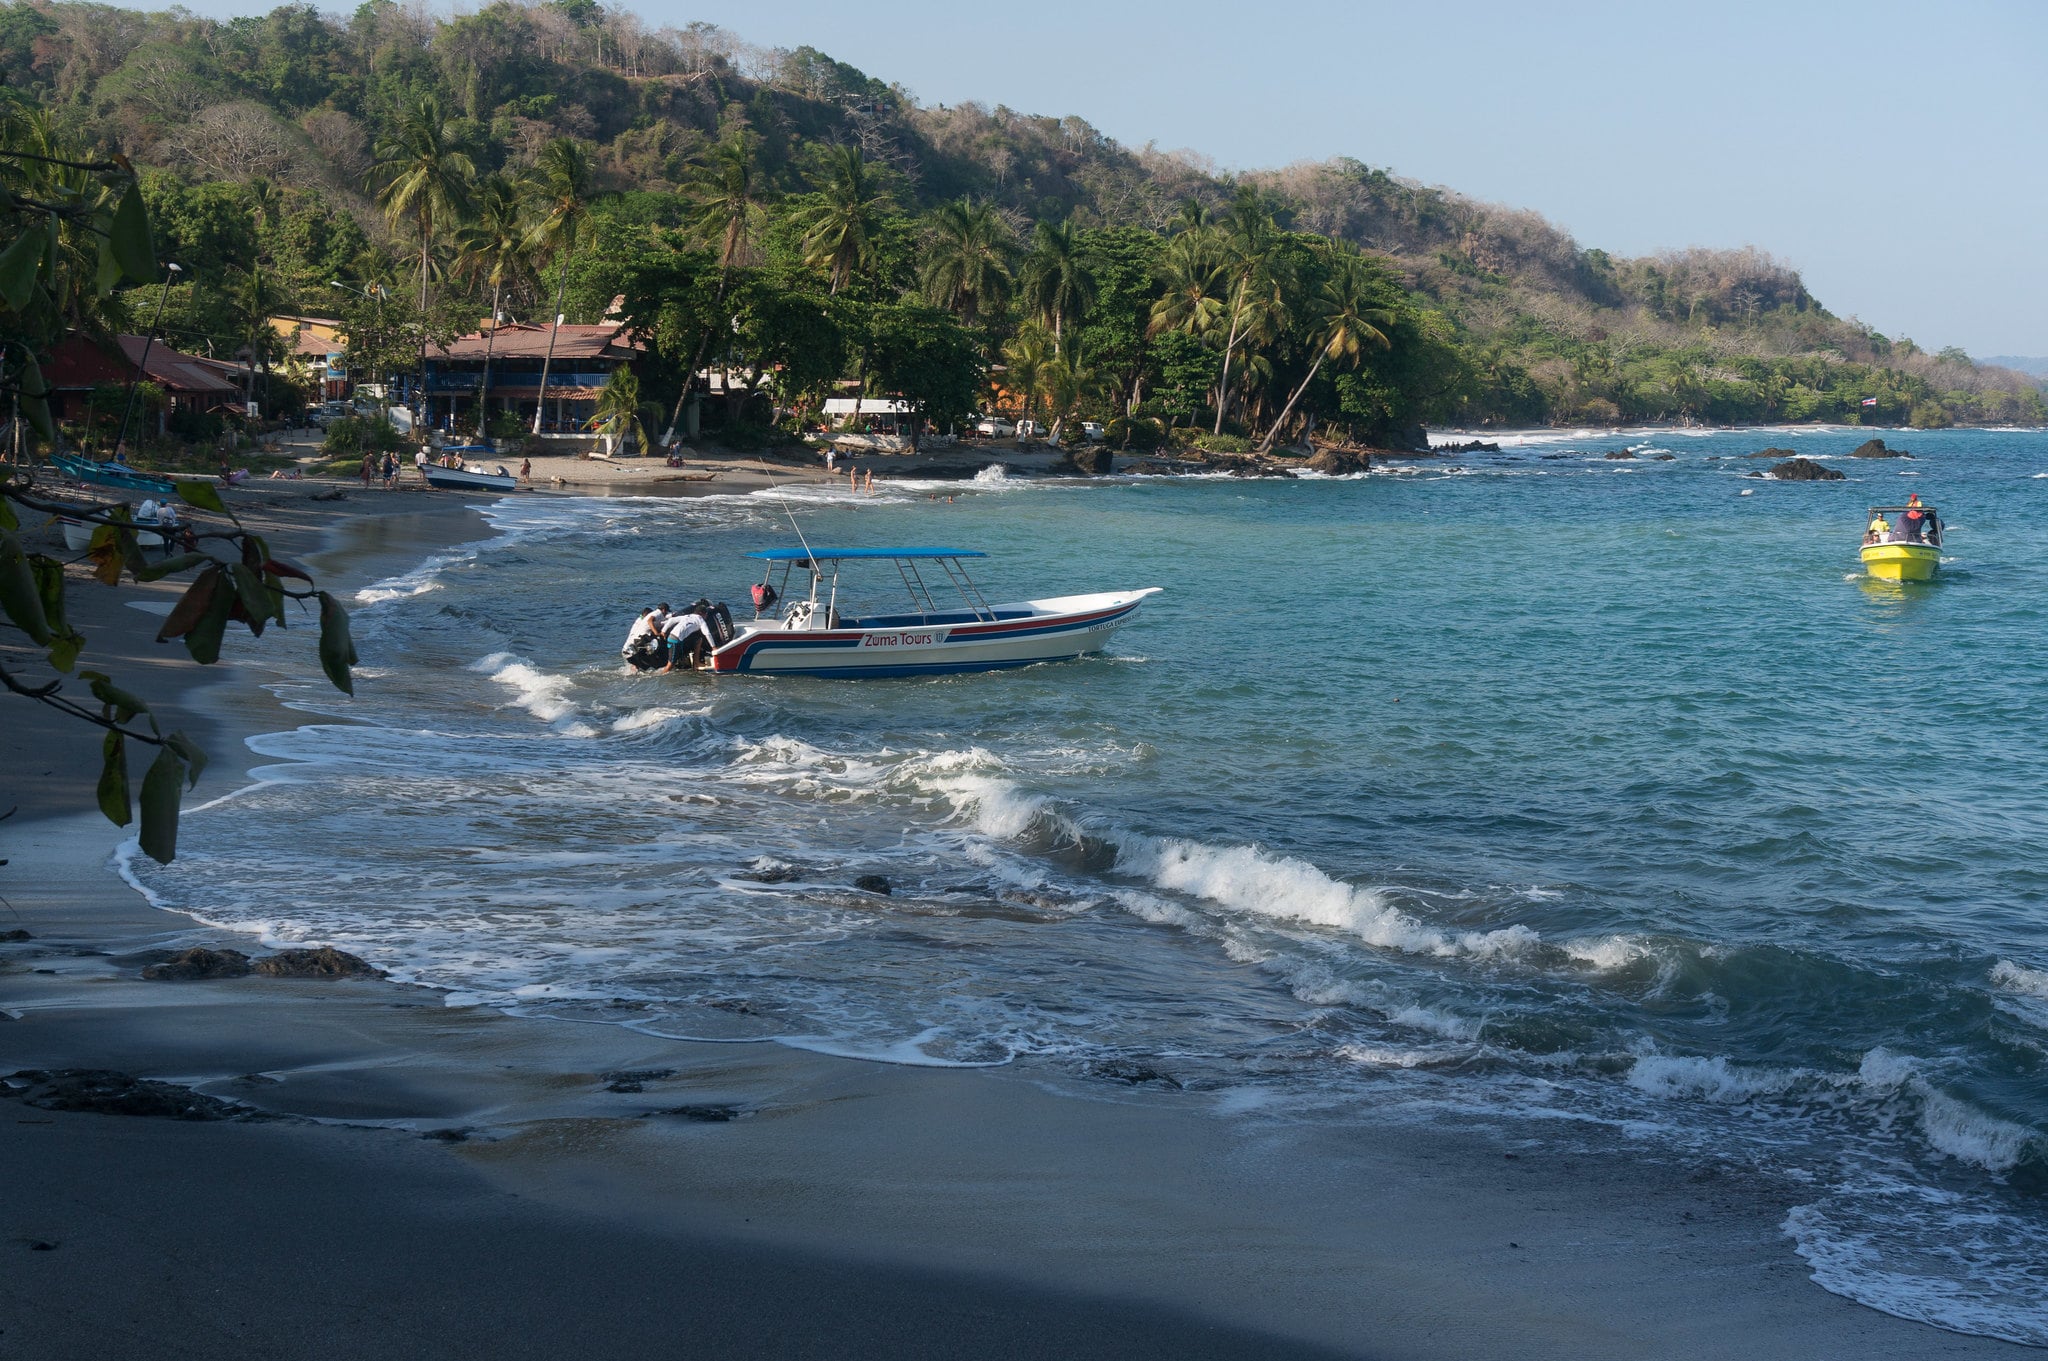 Where to stay in Costa Rica for great yoga? Nicoya Peninsula